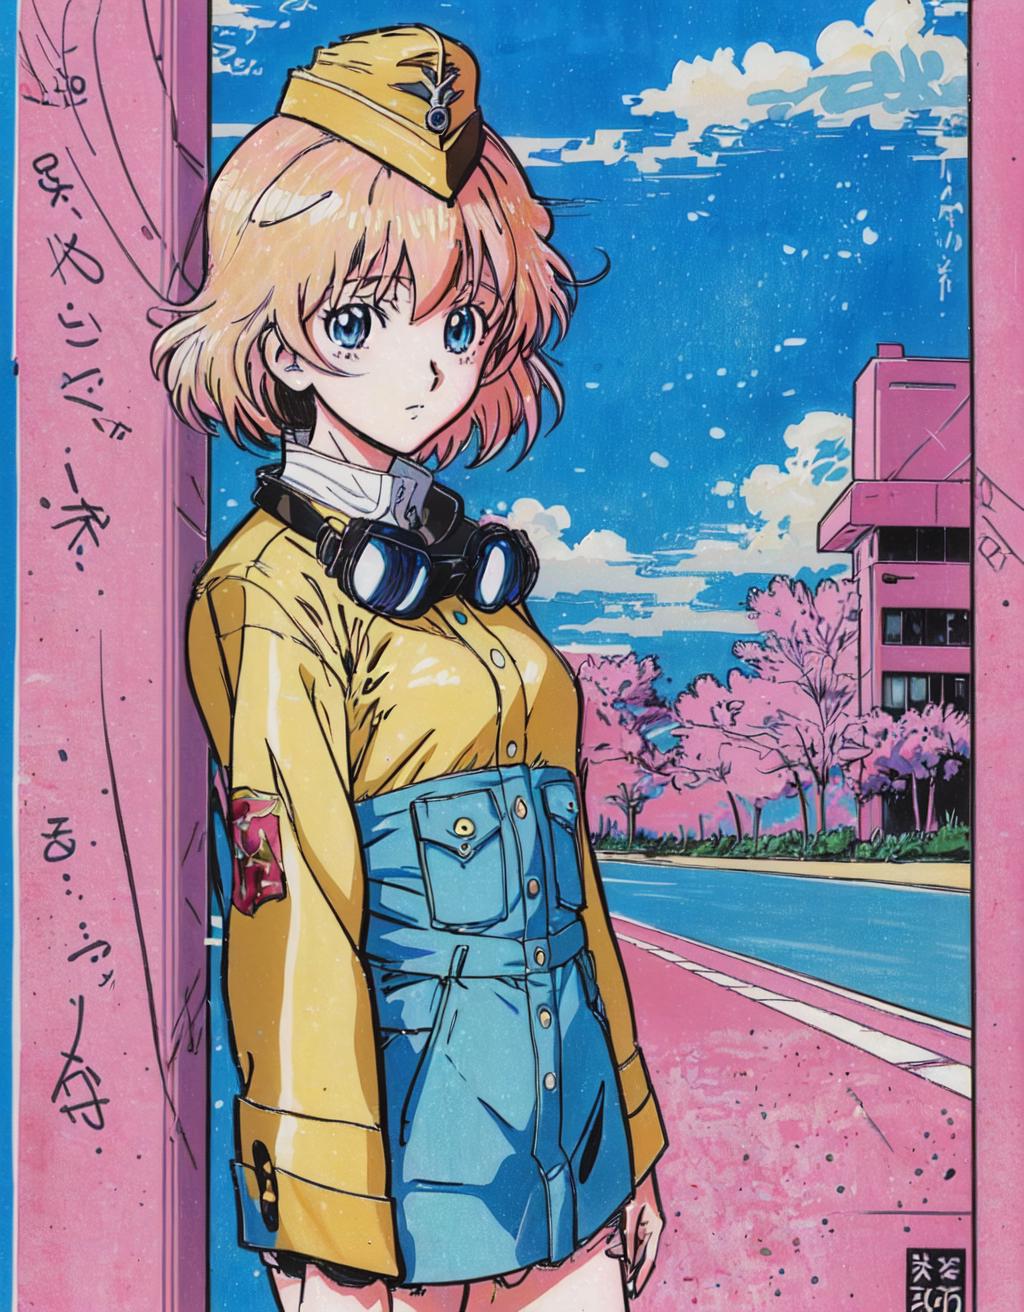 Amazon.co.jp: 80s Anime Style Coloring Book: Dazzling Lifestyle & Outfits  Coloring Pages Featuring Amazing Designs For Teens, Adults, Girls To Have  Fun And Color Fun : Pollard, Tanya: Foreign Language Books